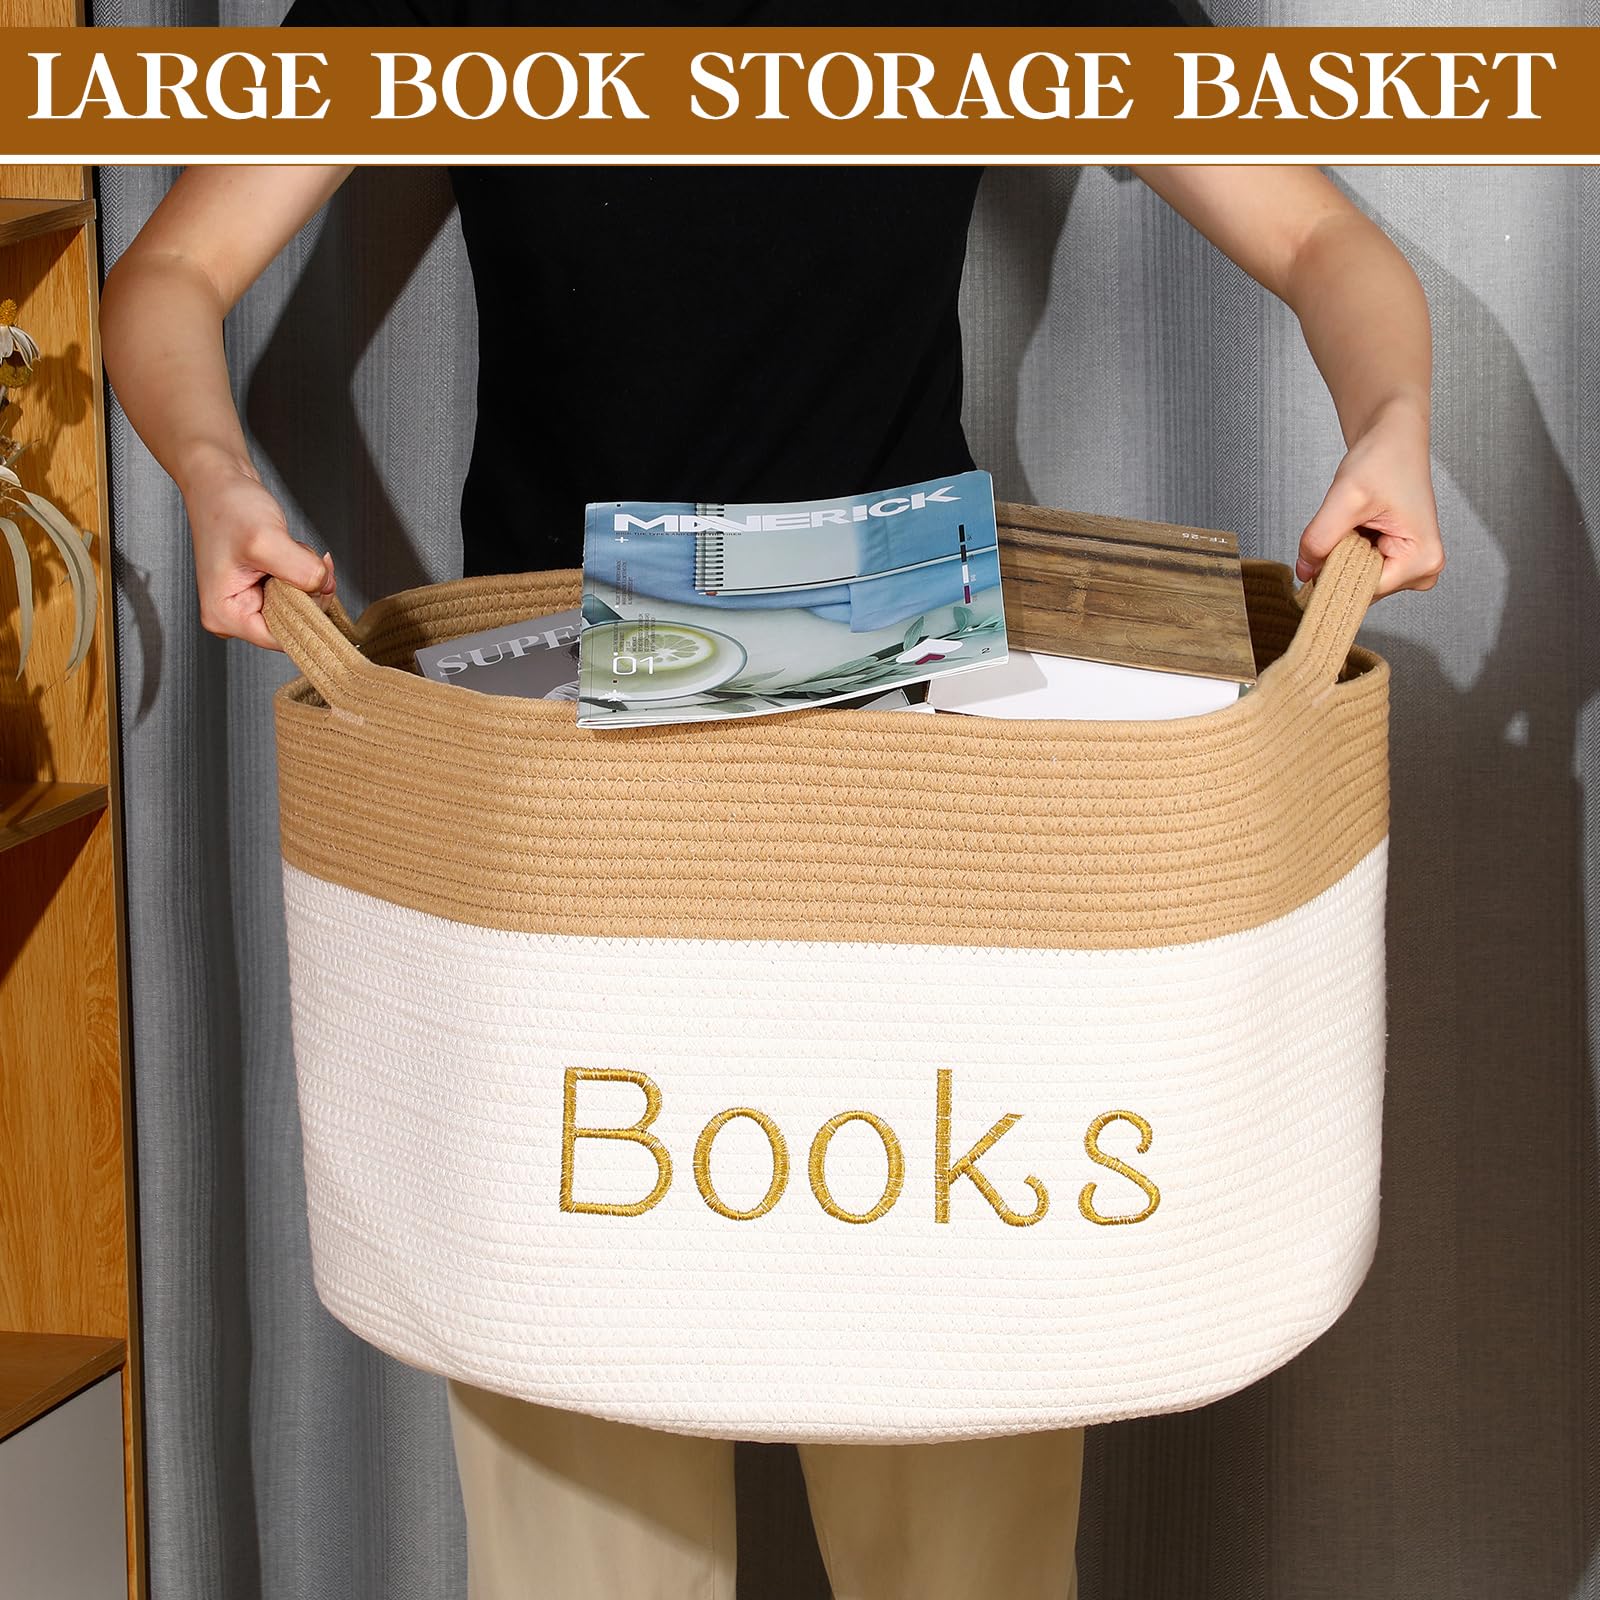 Dandat Cotton Rope Book Storage Basket Embroidered Book Bin 21.7 x 21.7 x 13.8 Inch Large Book Basket with Handles Book Tote Organizer for Nursery, Playroom, Living Room, Classroom